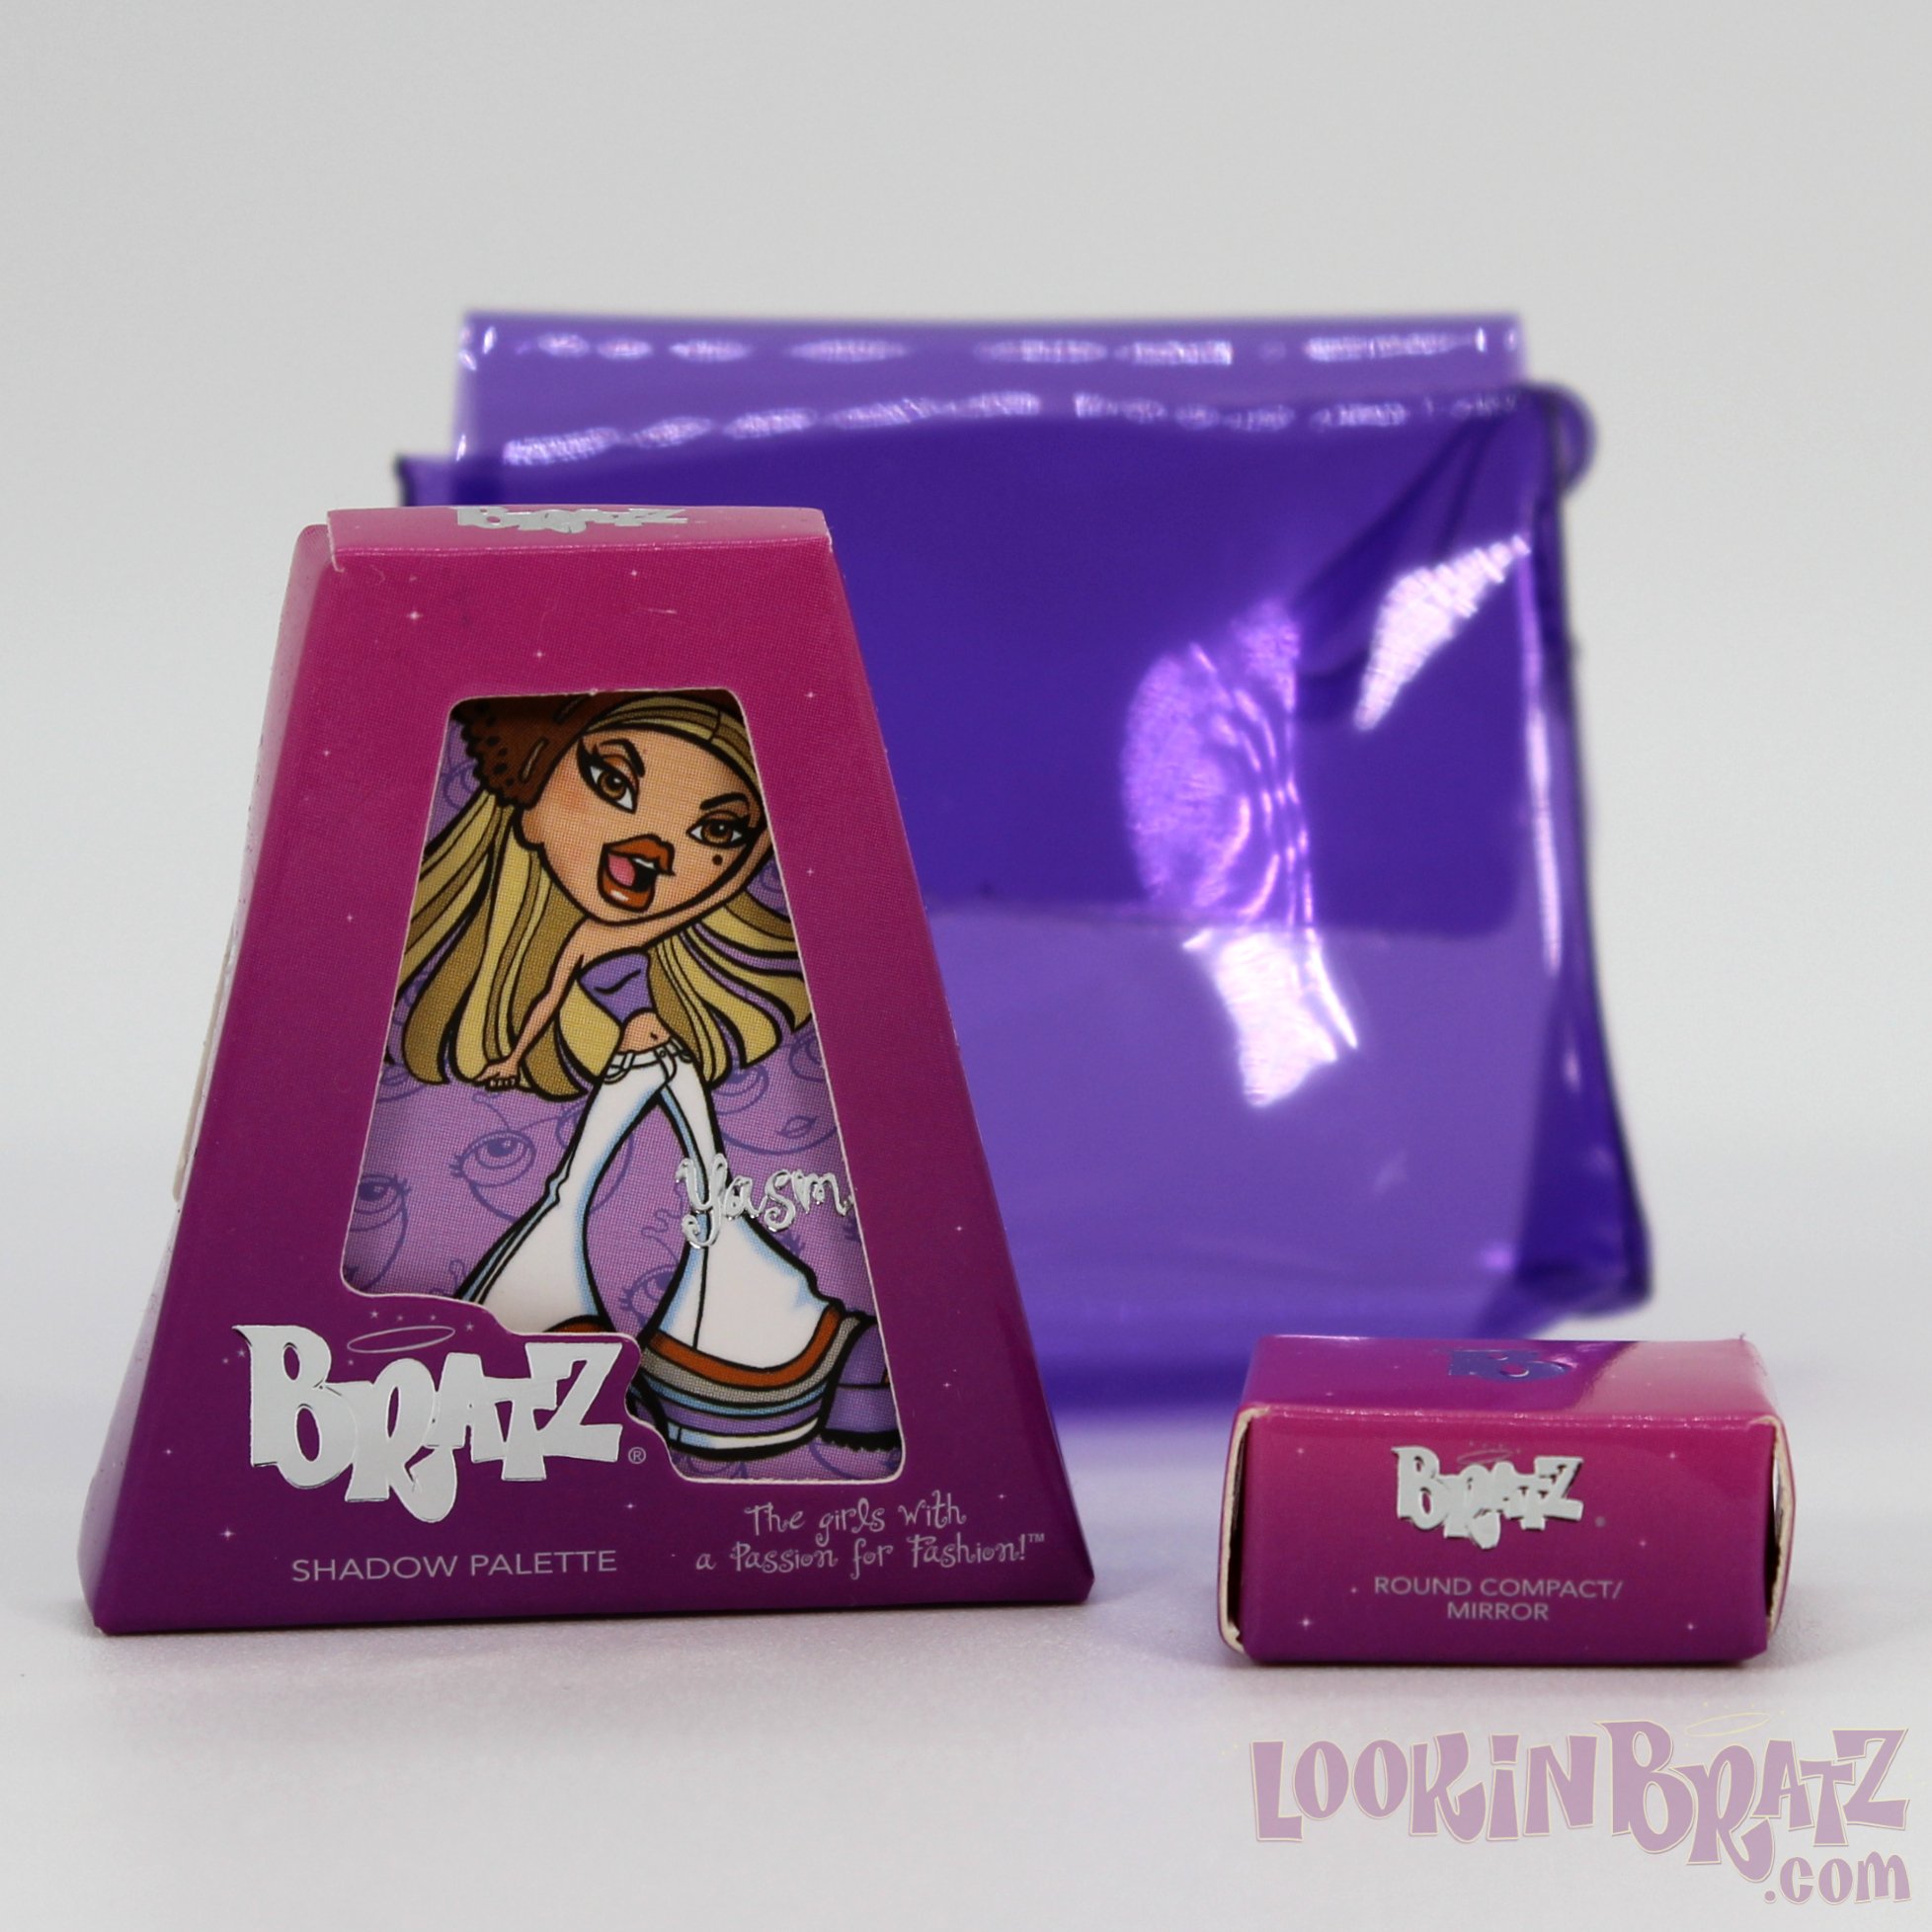 Mini Bratz Cosmetics First Edition Yasmin Shadow Palette and Round Compact Mirror (Packaging)